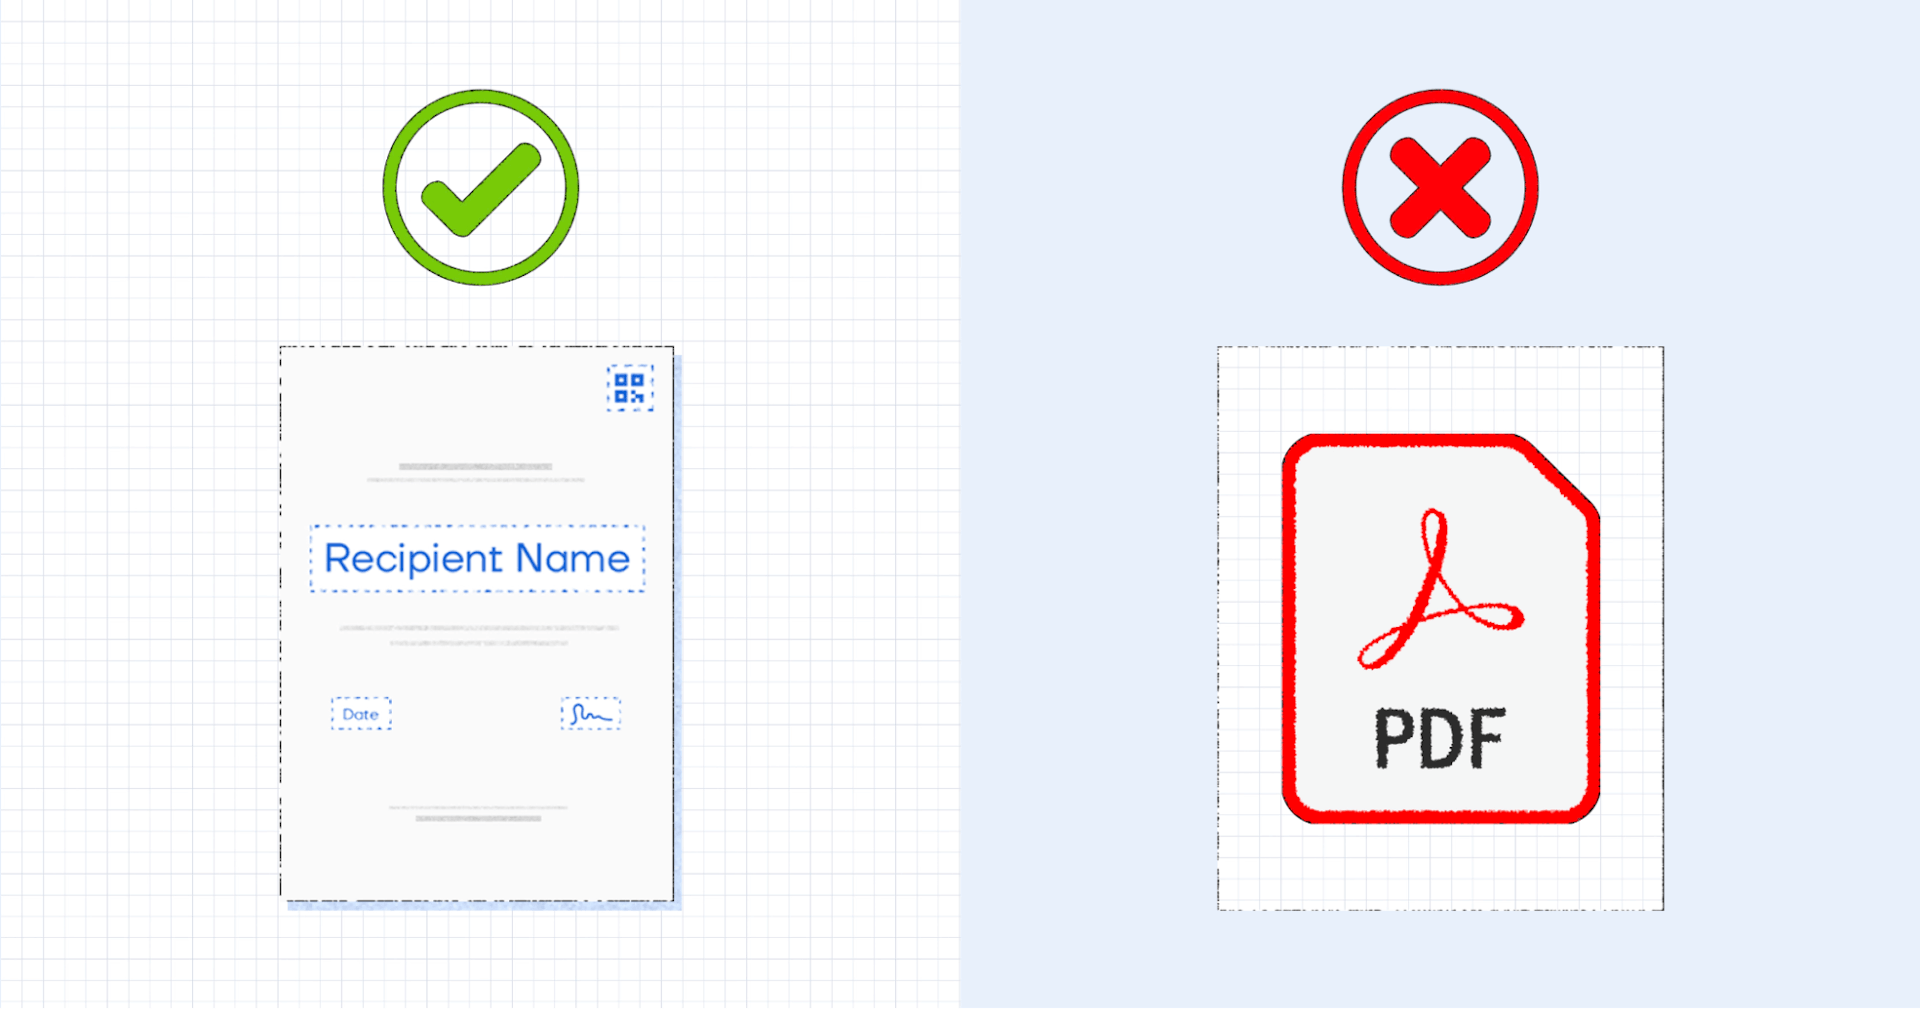 The pros and cons of using PDF certificates vs digital credentials in the certification program.